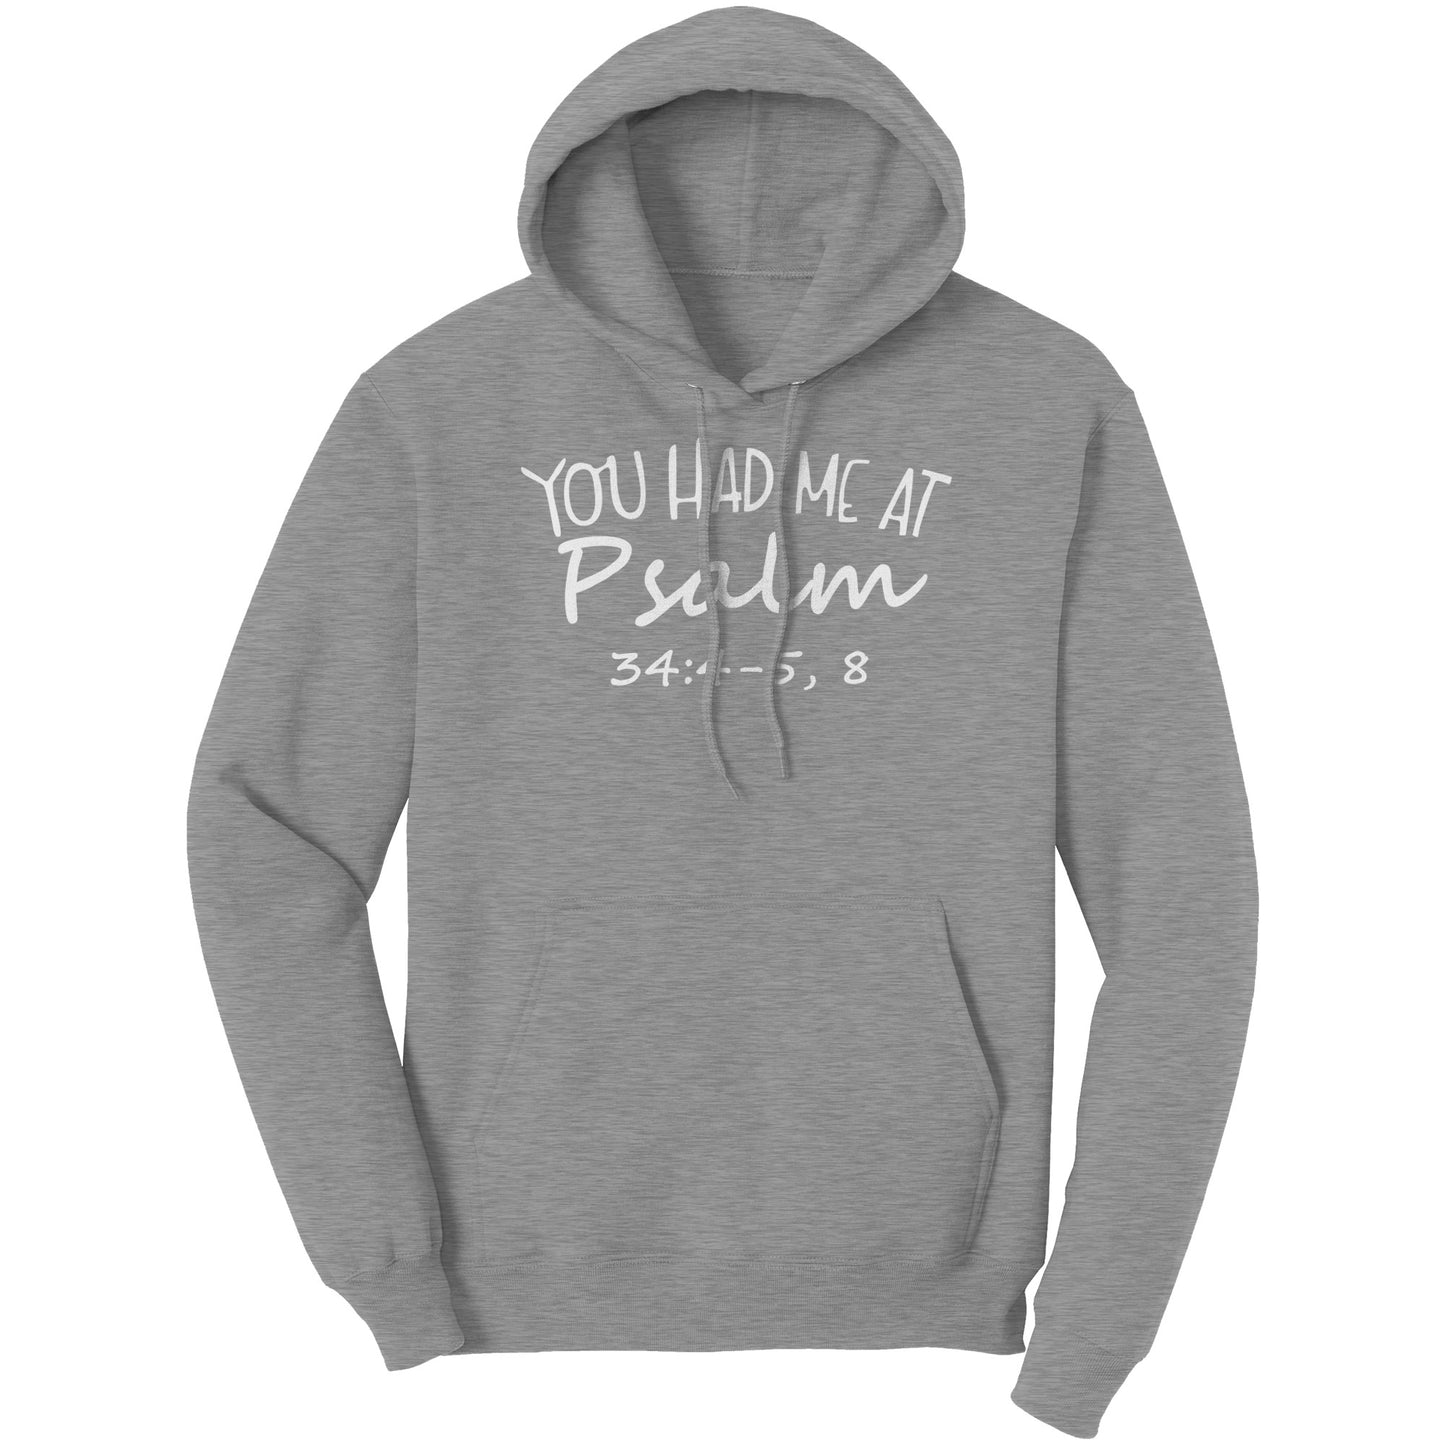 You Had Me At Psalm 34:4-5, 8 Hoodie Part 2